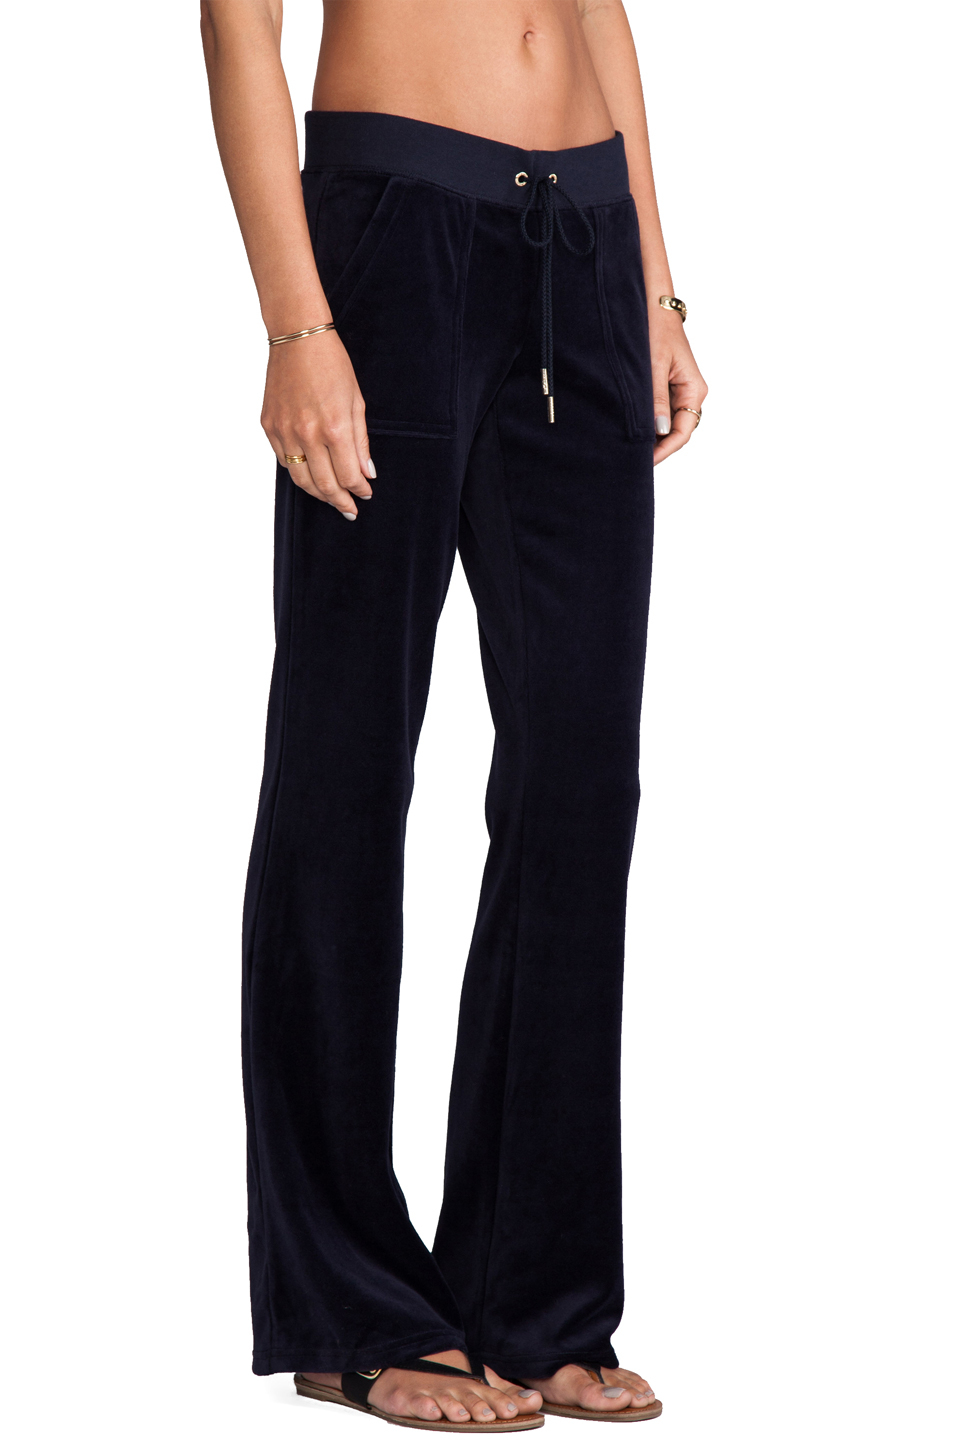 Juicy Couture J Bling Velour Bootcut Pant in Navy in Blue - Lyst